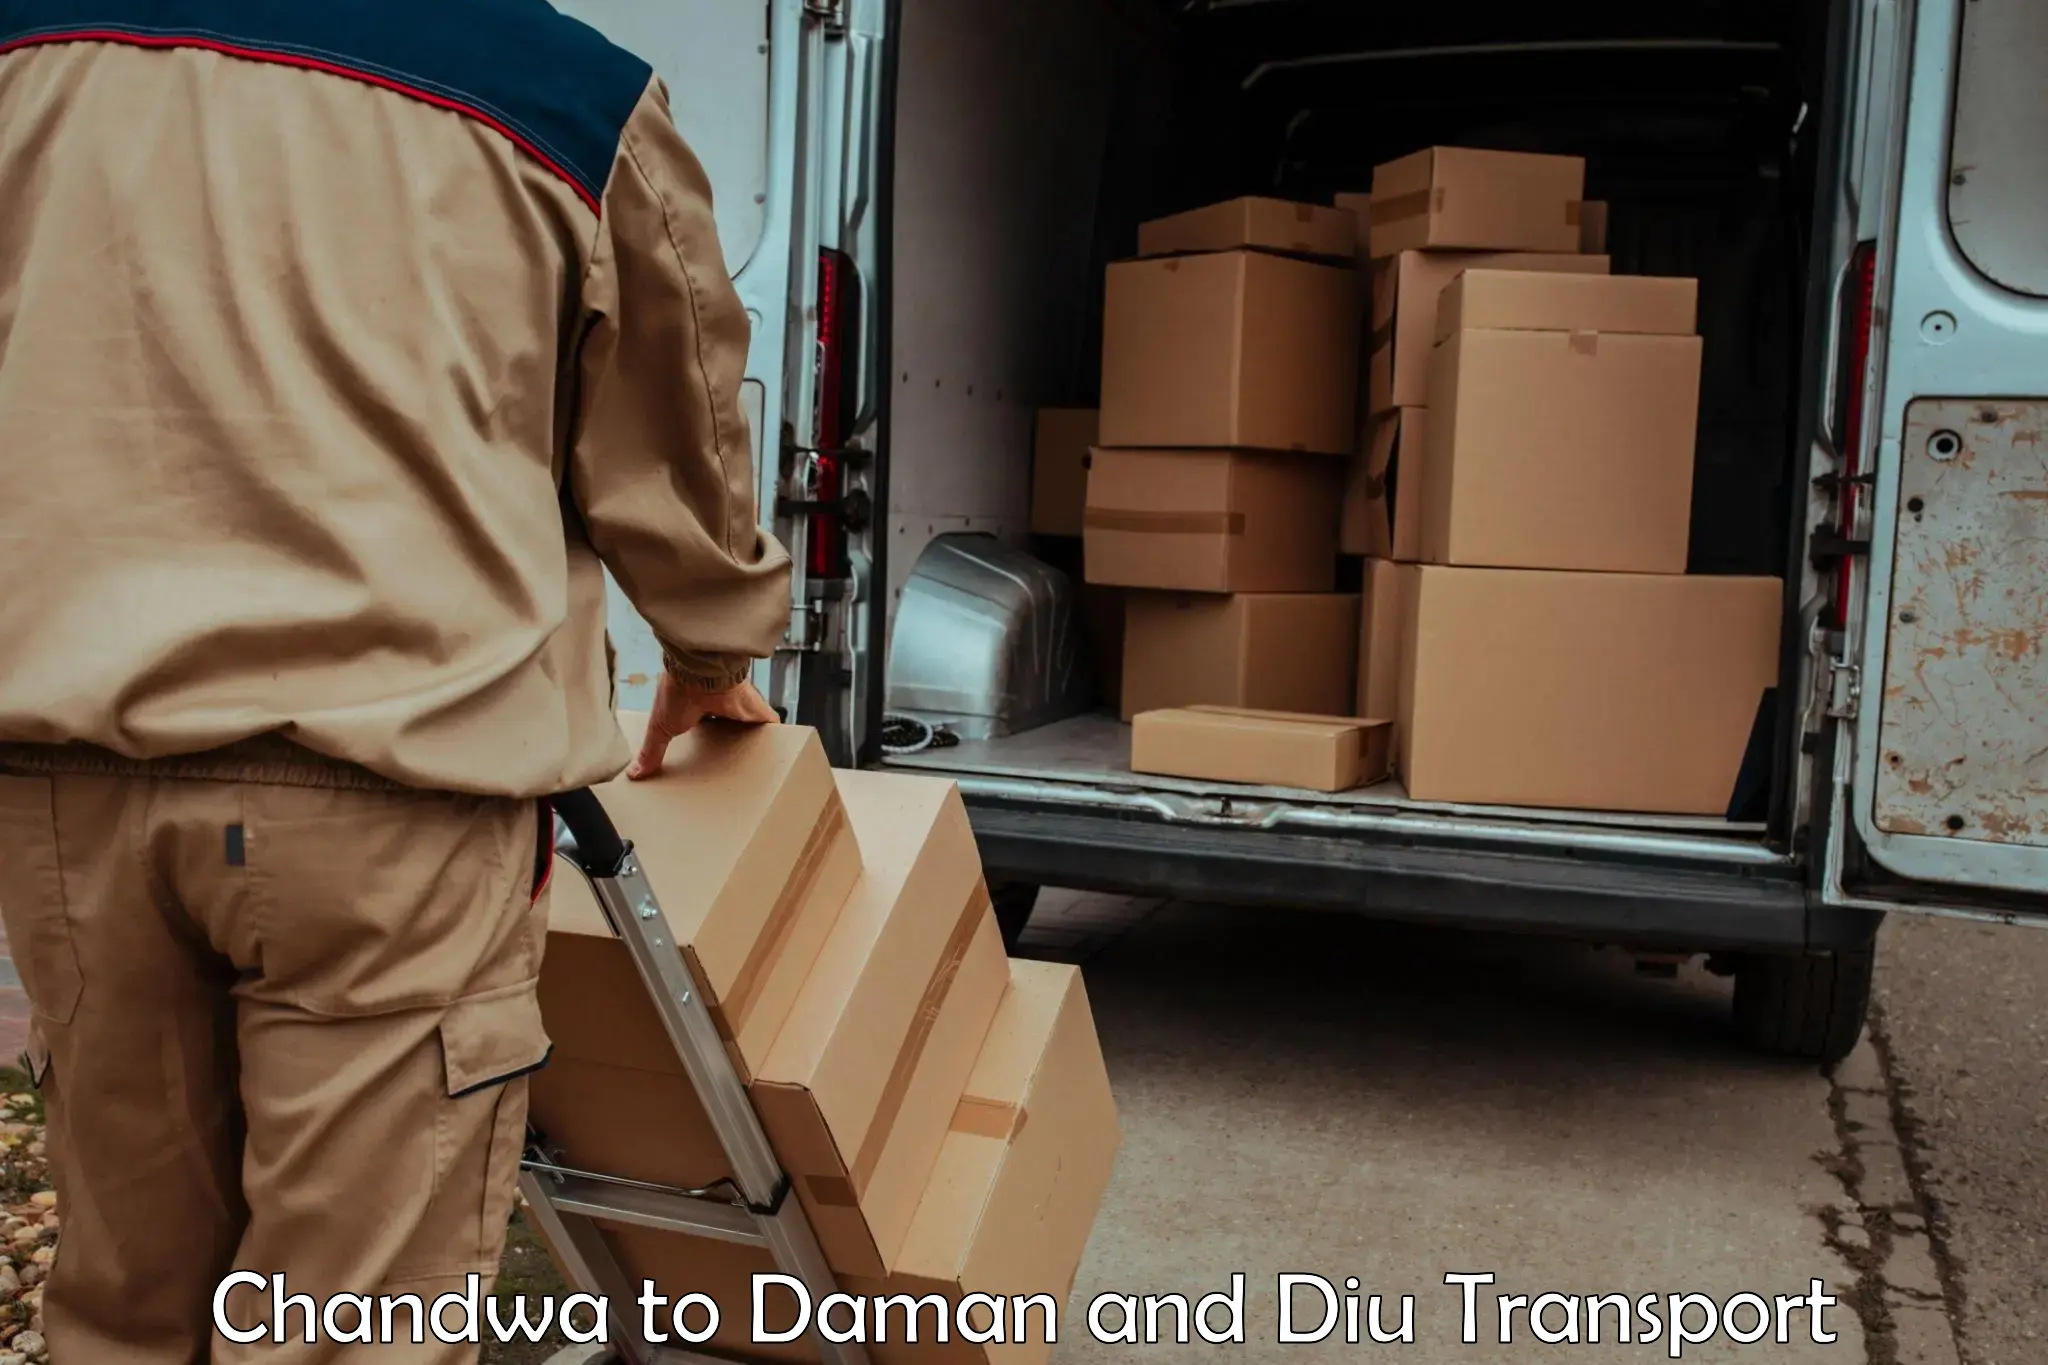 Air freight transport services Chandwa to Daman and Diu